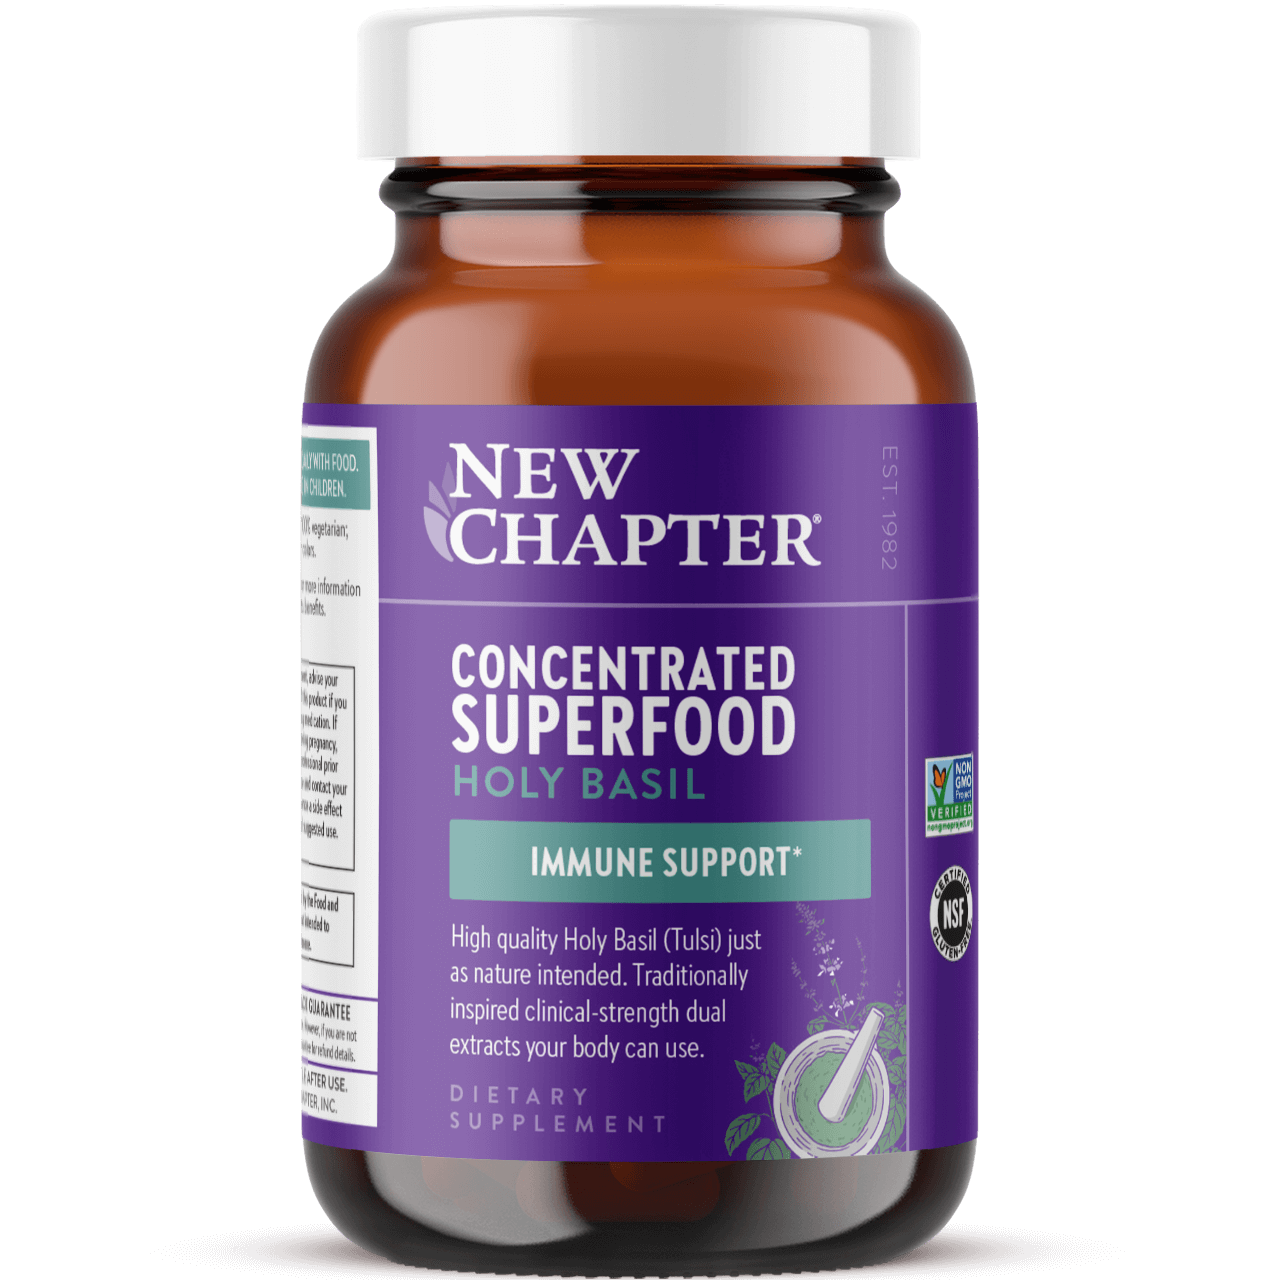 Concentrated Superfood Holy Basil